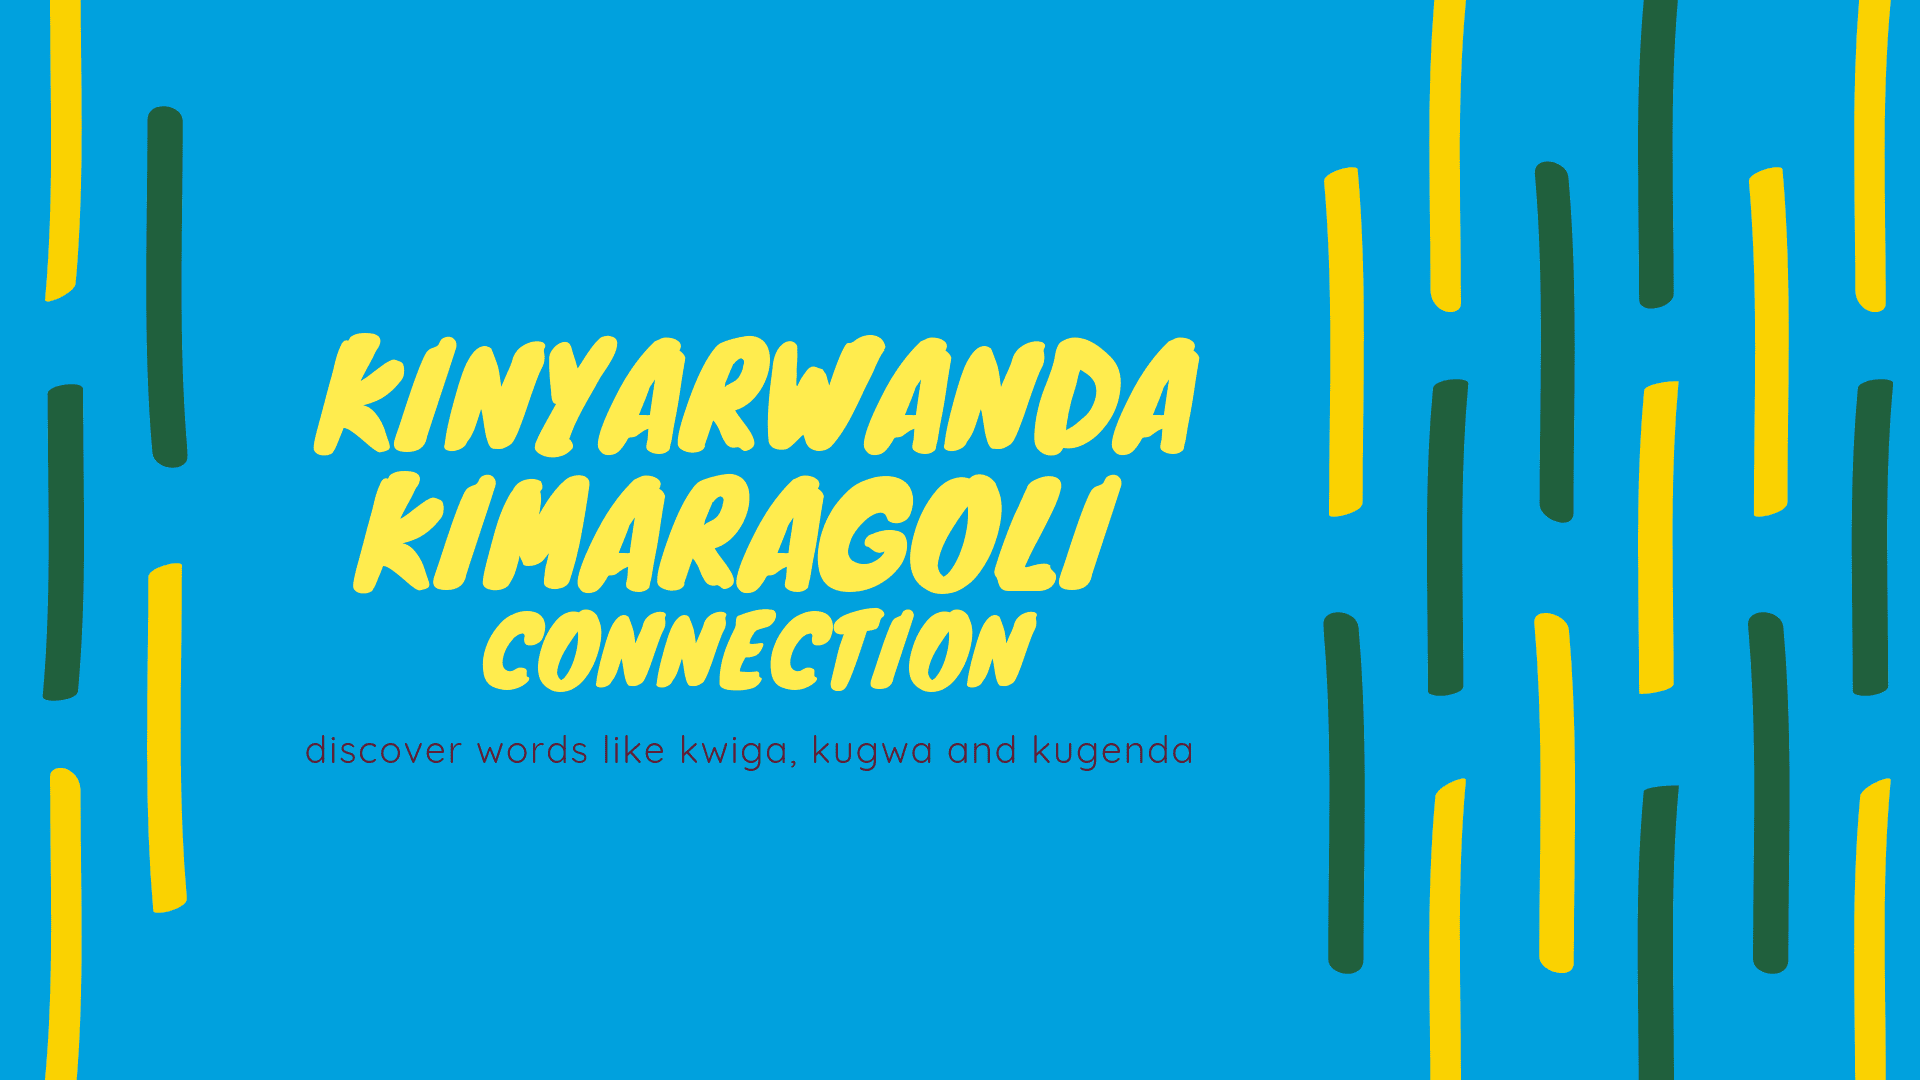 poster featuring colors of the Rwandese flag serving as back drop of kinyarwanda and kimaragoli link